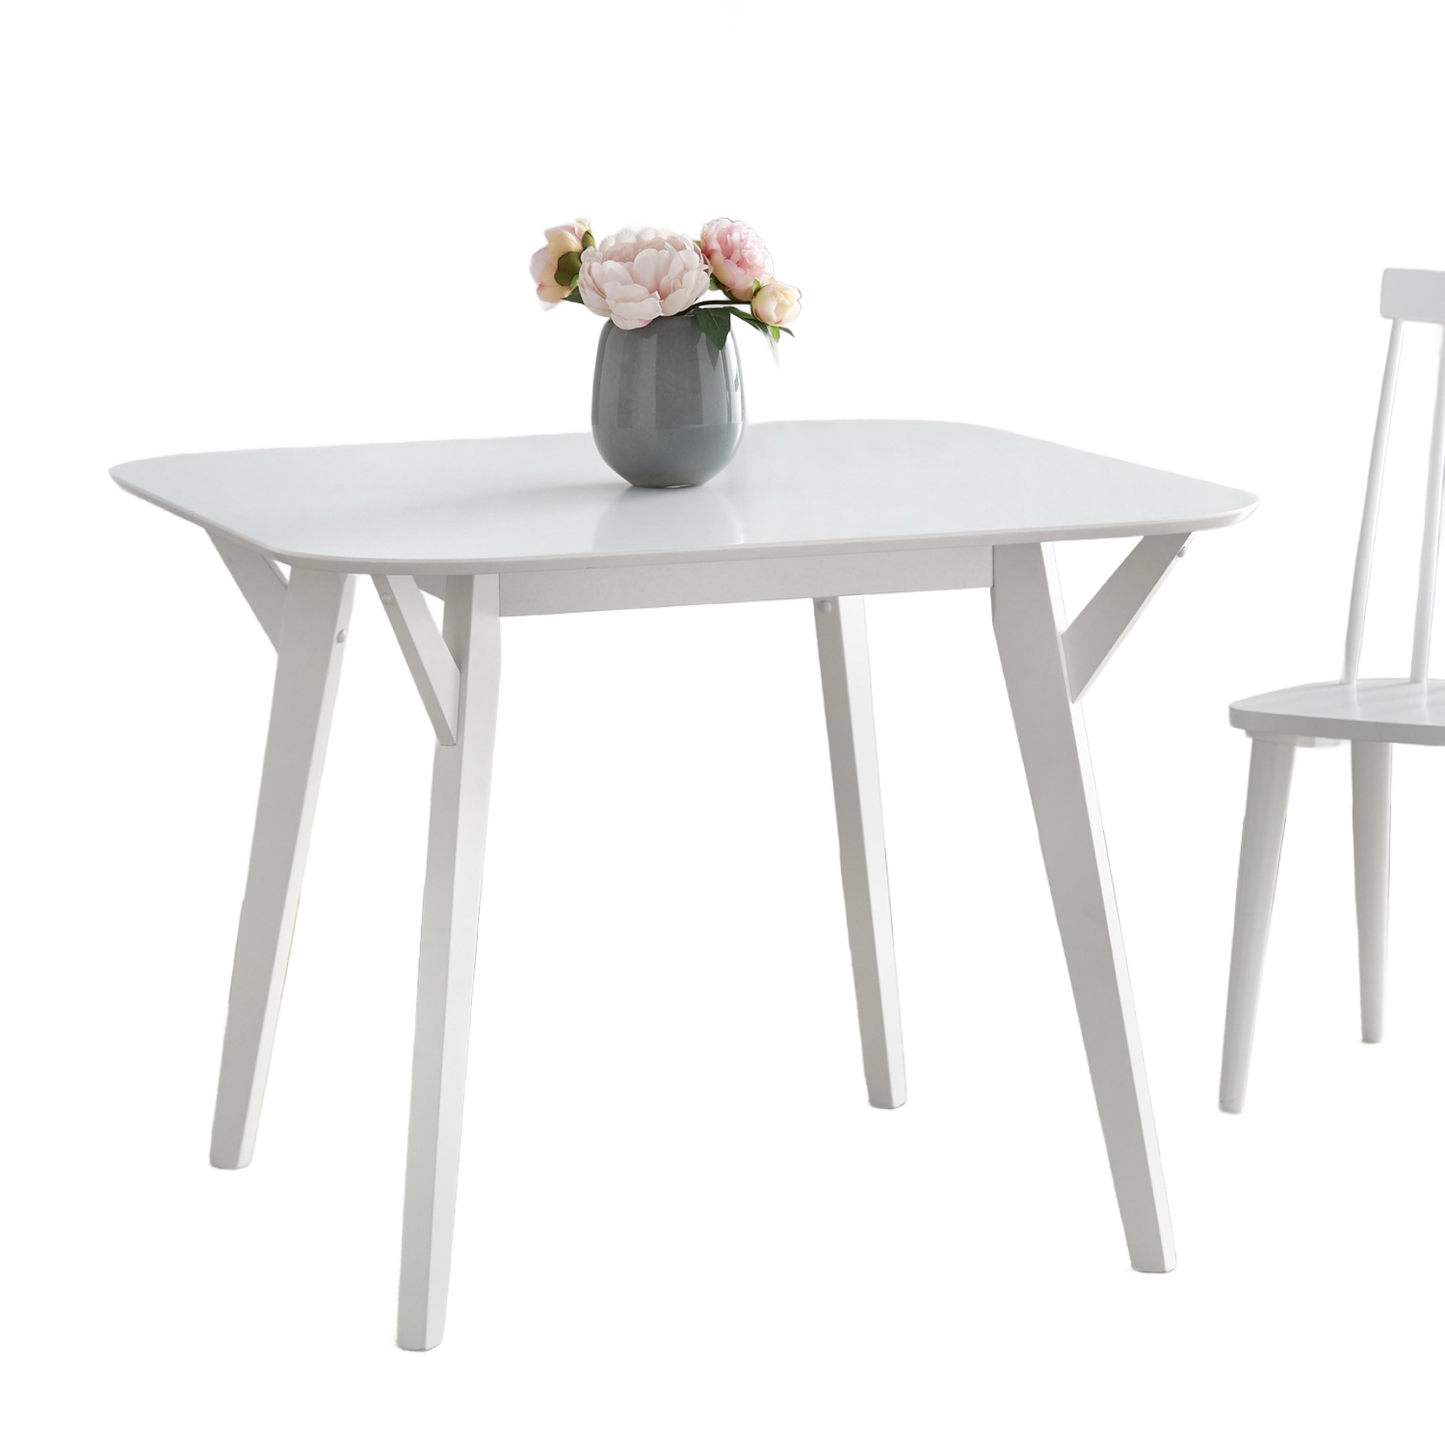 angelo:HOME Dining Set - Annabelle 3-Piece (White Table, Grey Chairs)